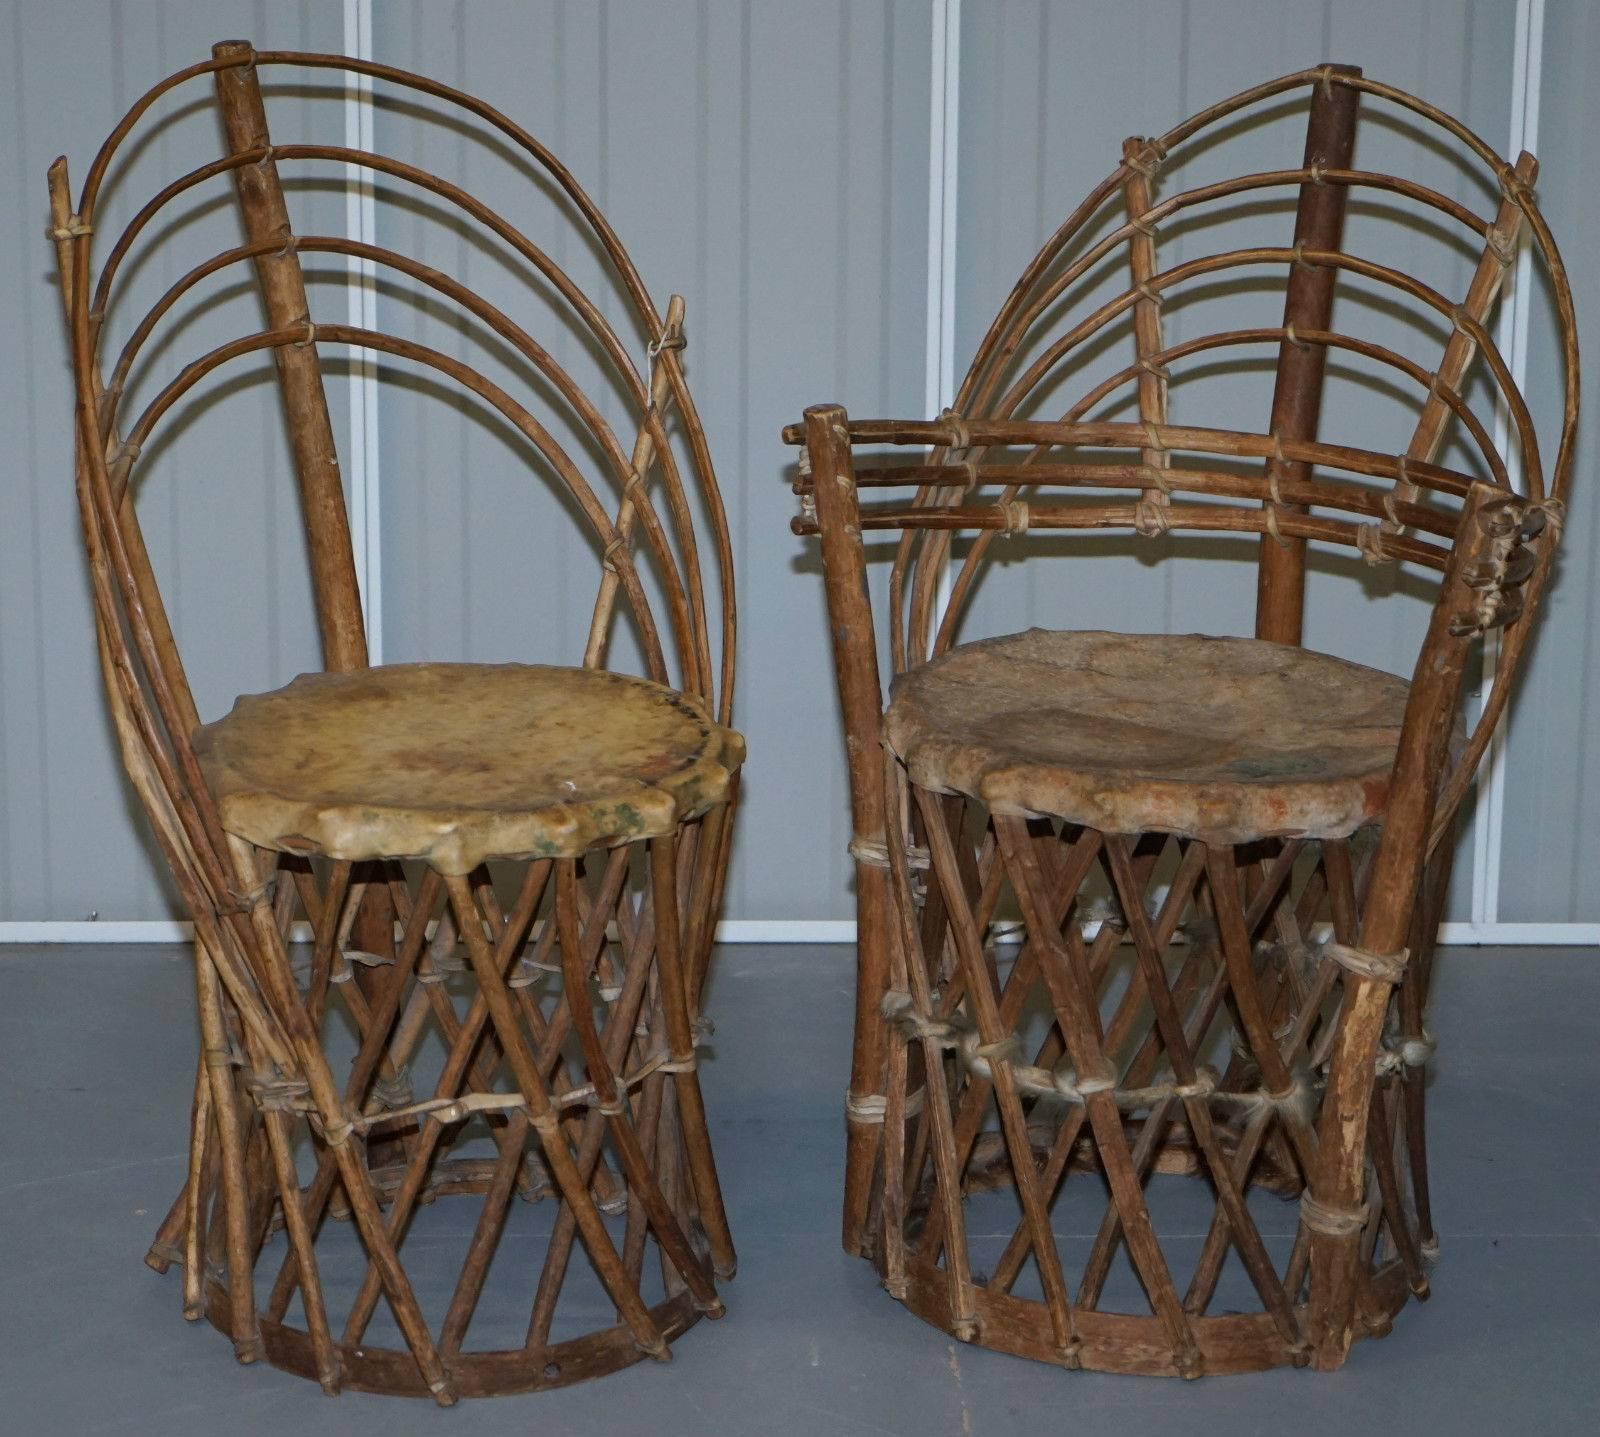 We are delighted to offer for sale this stunning and very rare vintage / antique Mexican Native American Equipale table two chairs and side table

This suite is very rare and beautifully made, very urban and authentic in style and form, the base